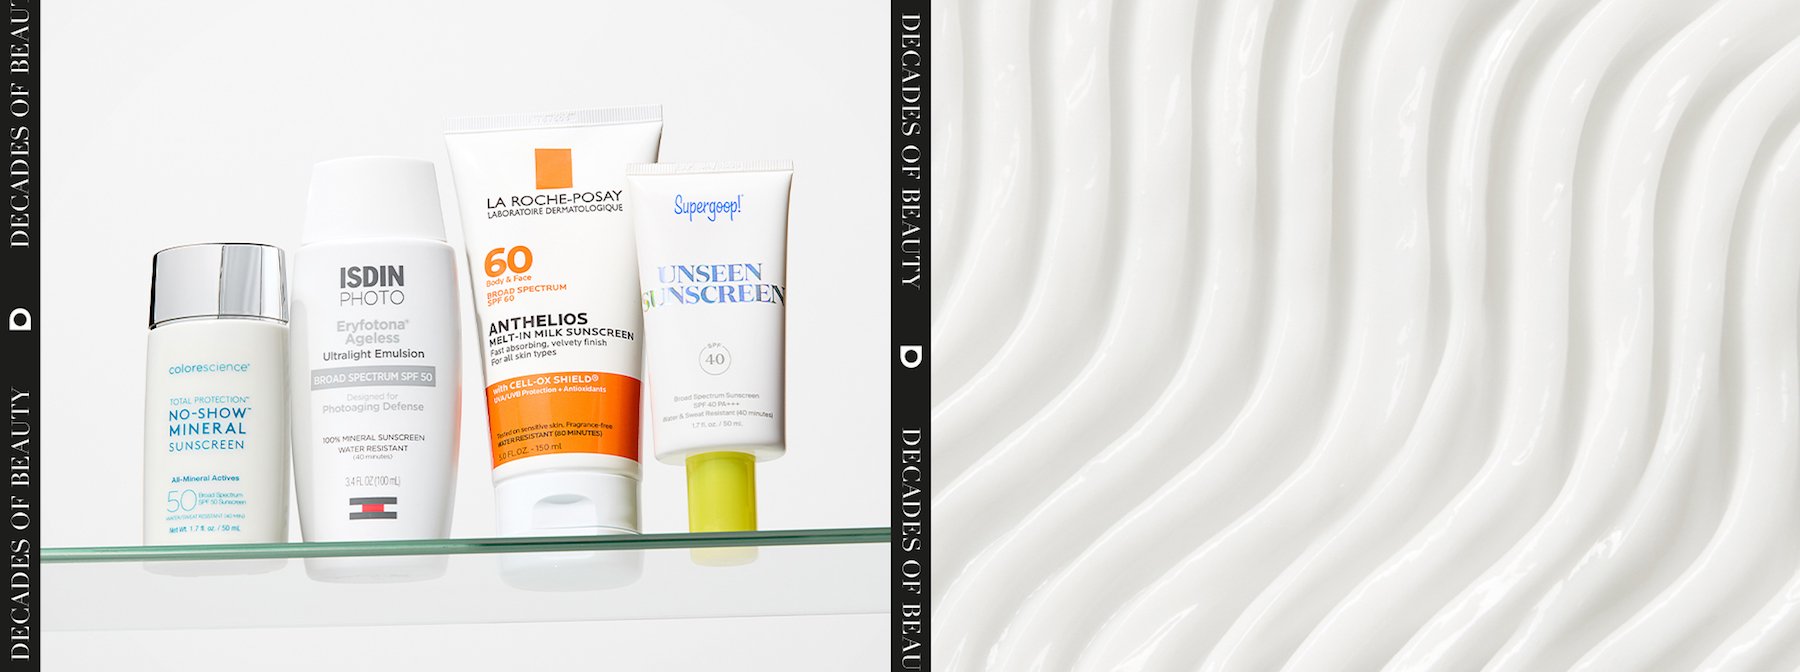 Yes, You Should Wear Sunscreen Every Day—Here Are 5 Reasons Why